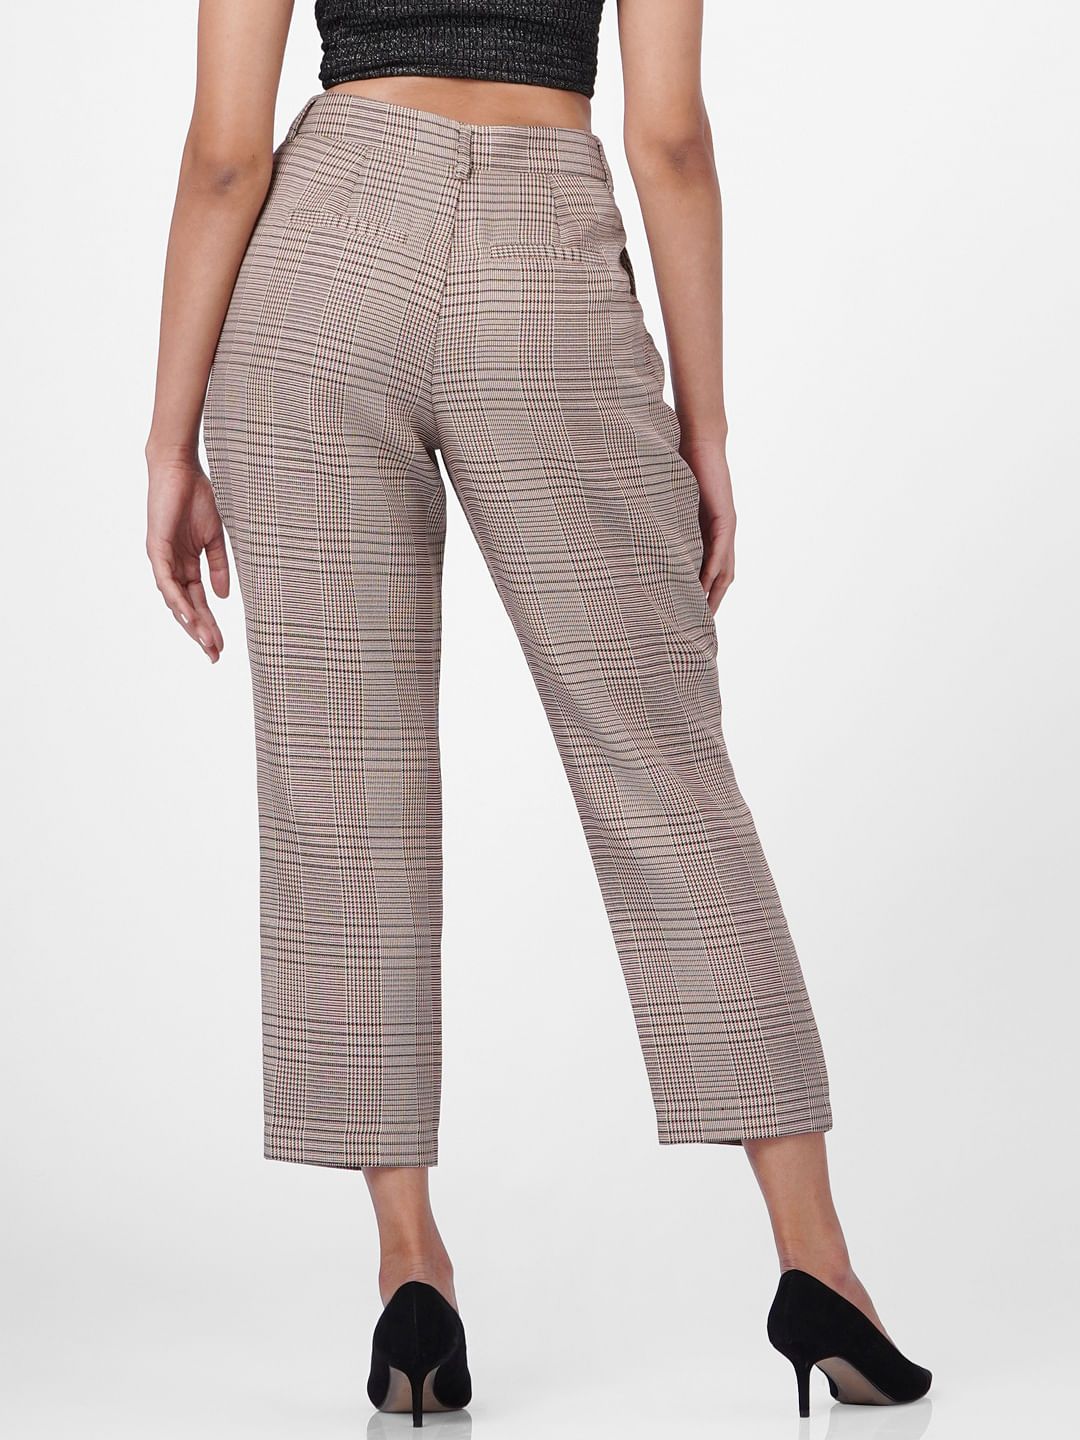 Buy YEZI Slim Fit Check Pant for WomenGirlsColor Beige Size28 at  Amazonin